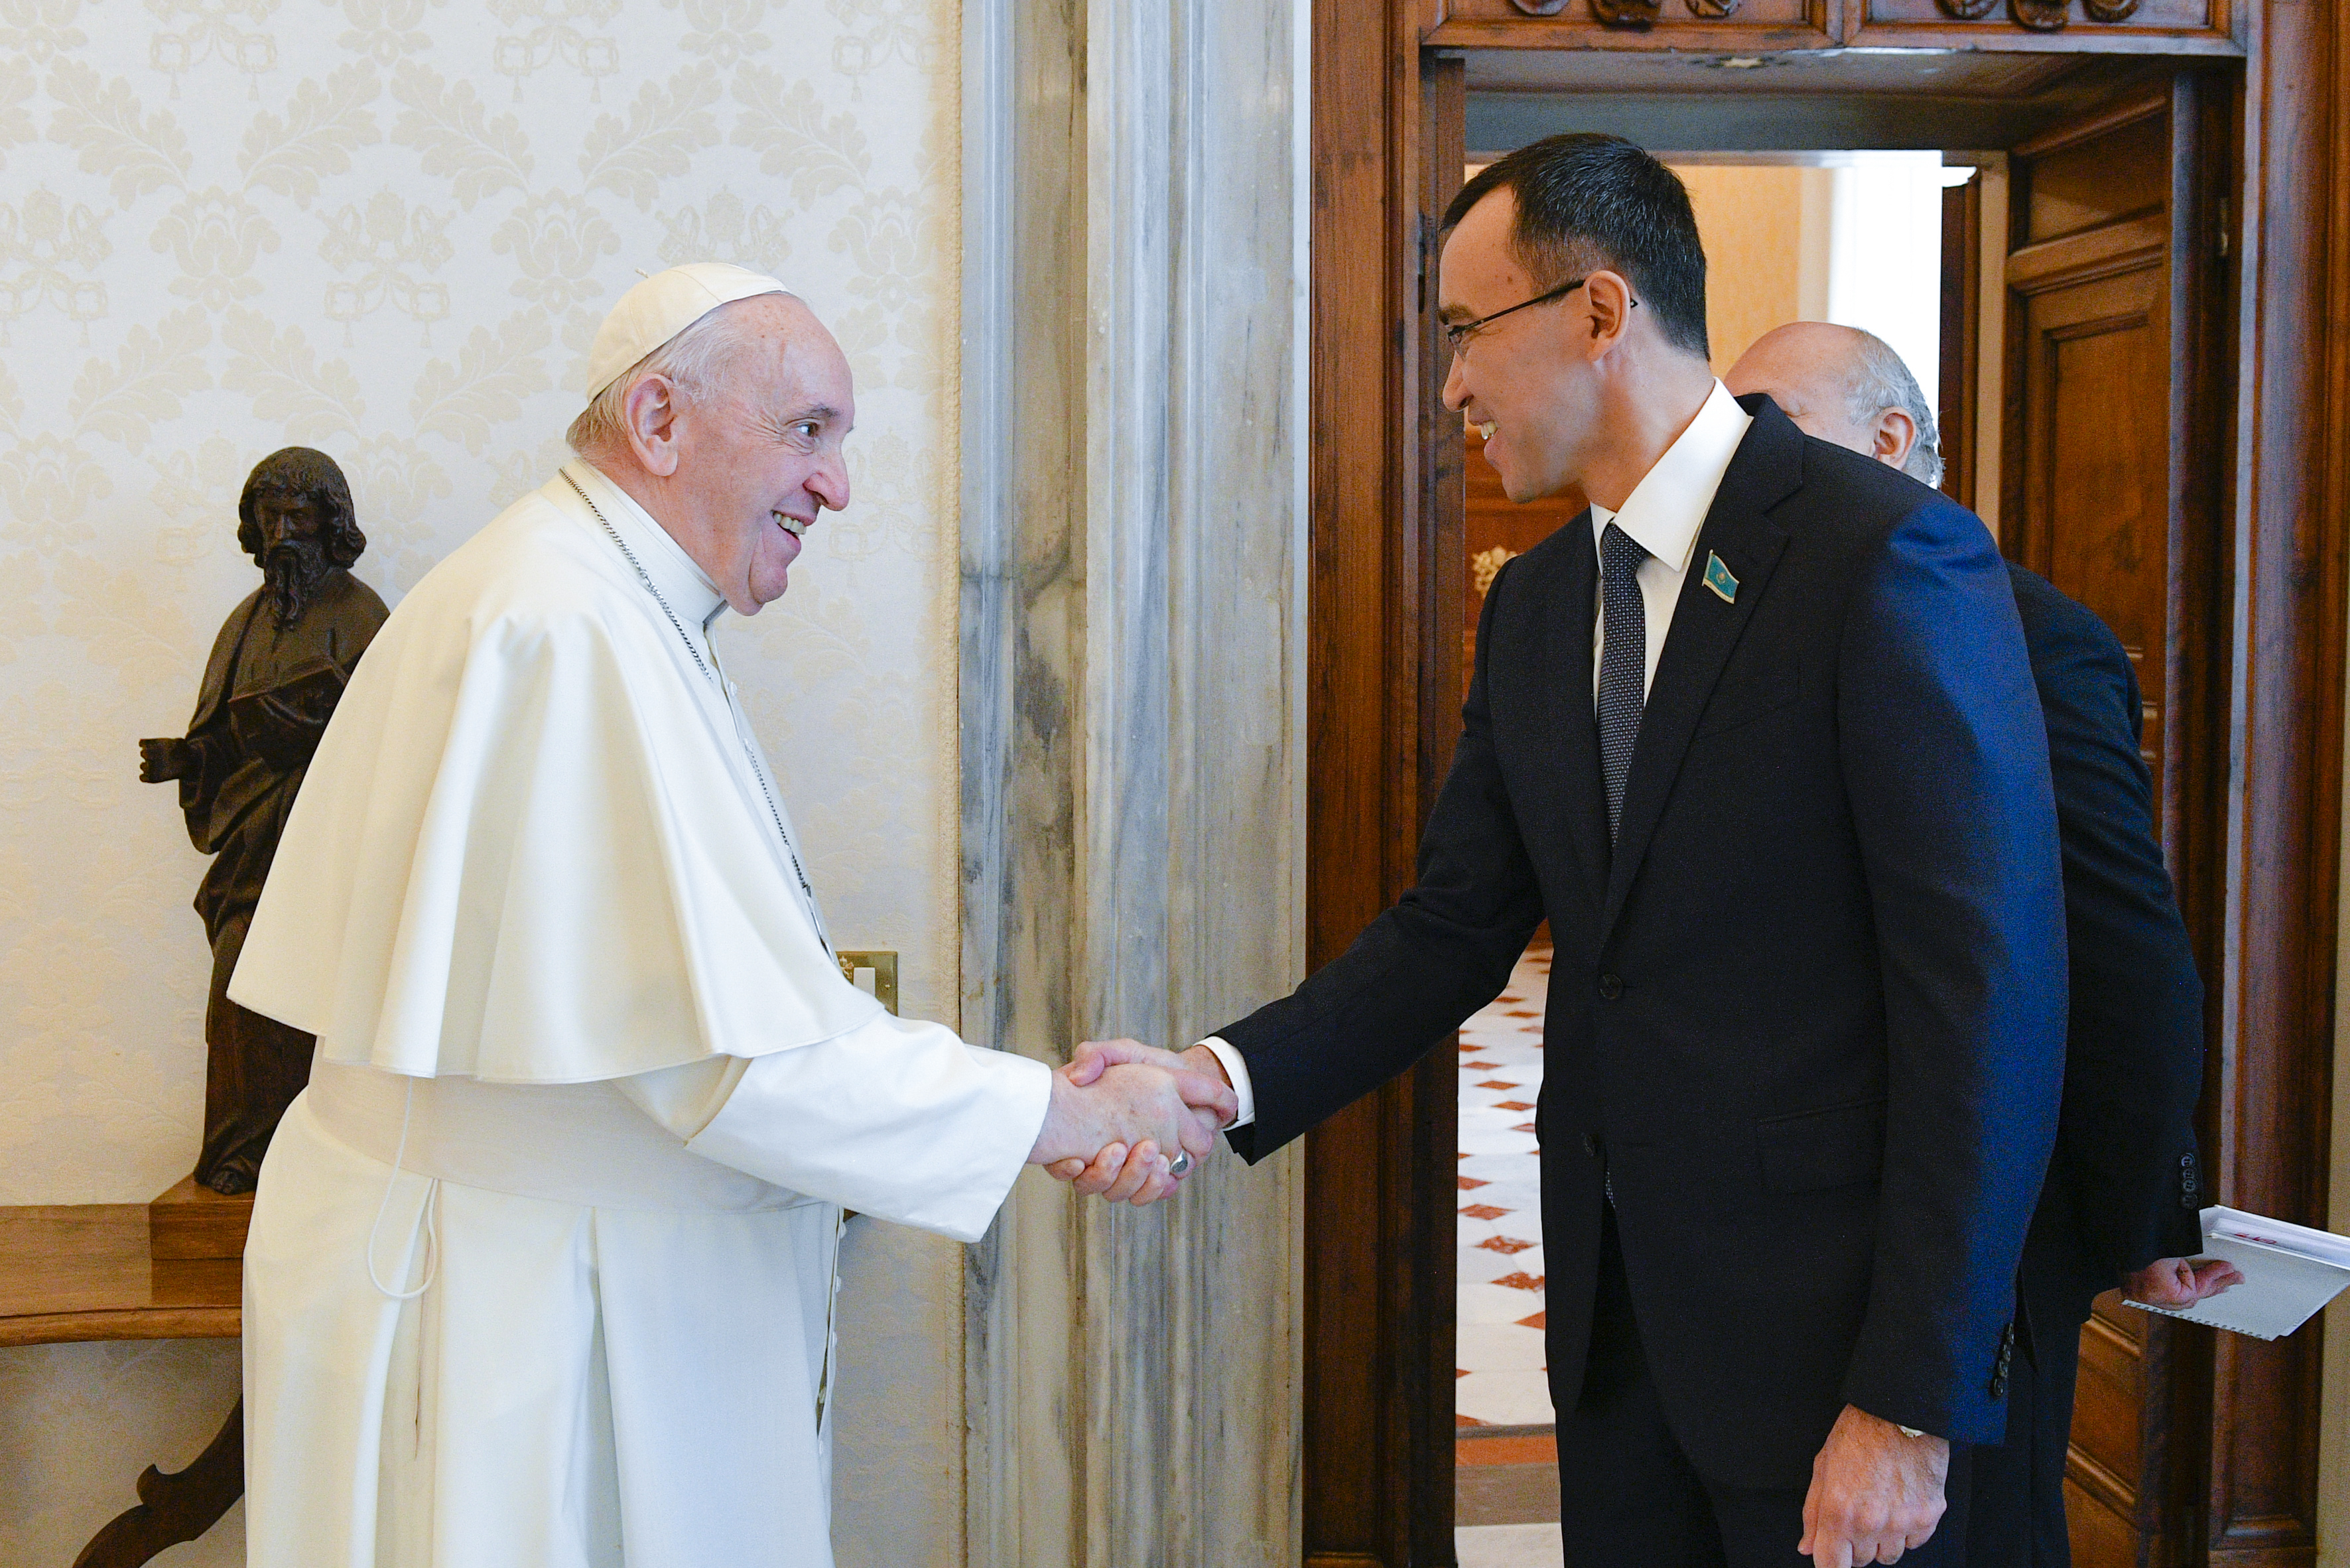 Maulen Ashimbayev met with Pope Francis